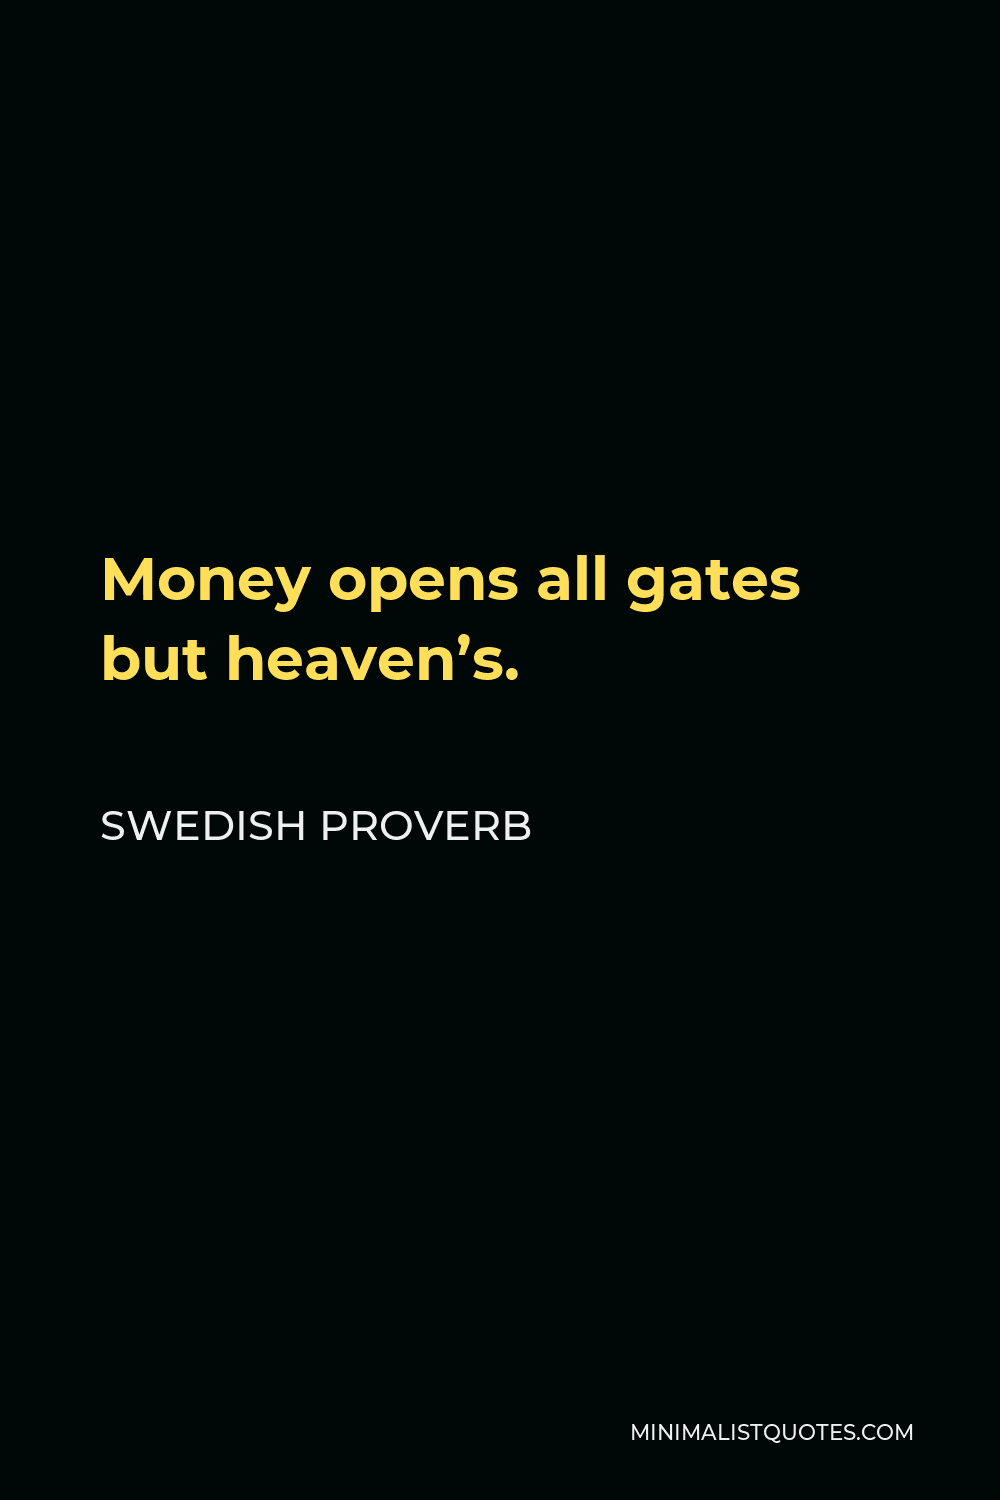 Swedish Proverb Quote - Money opens all gates but heaven’s.